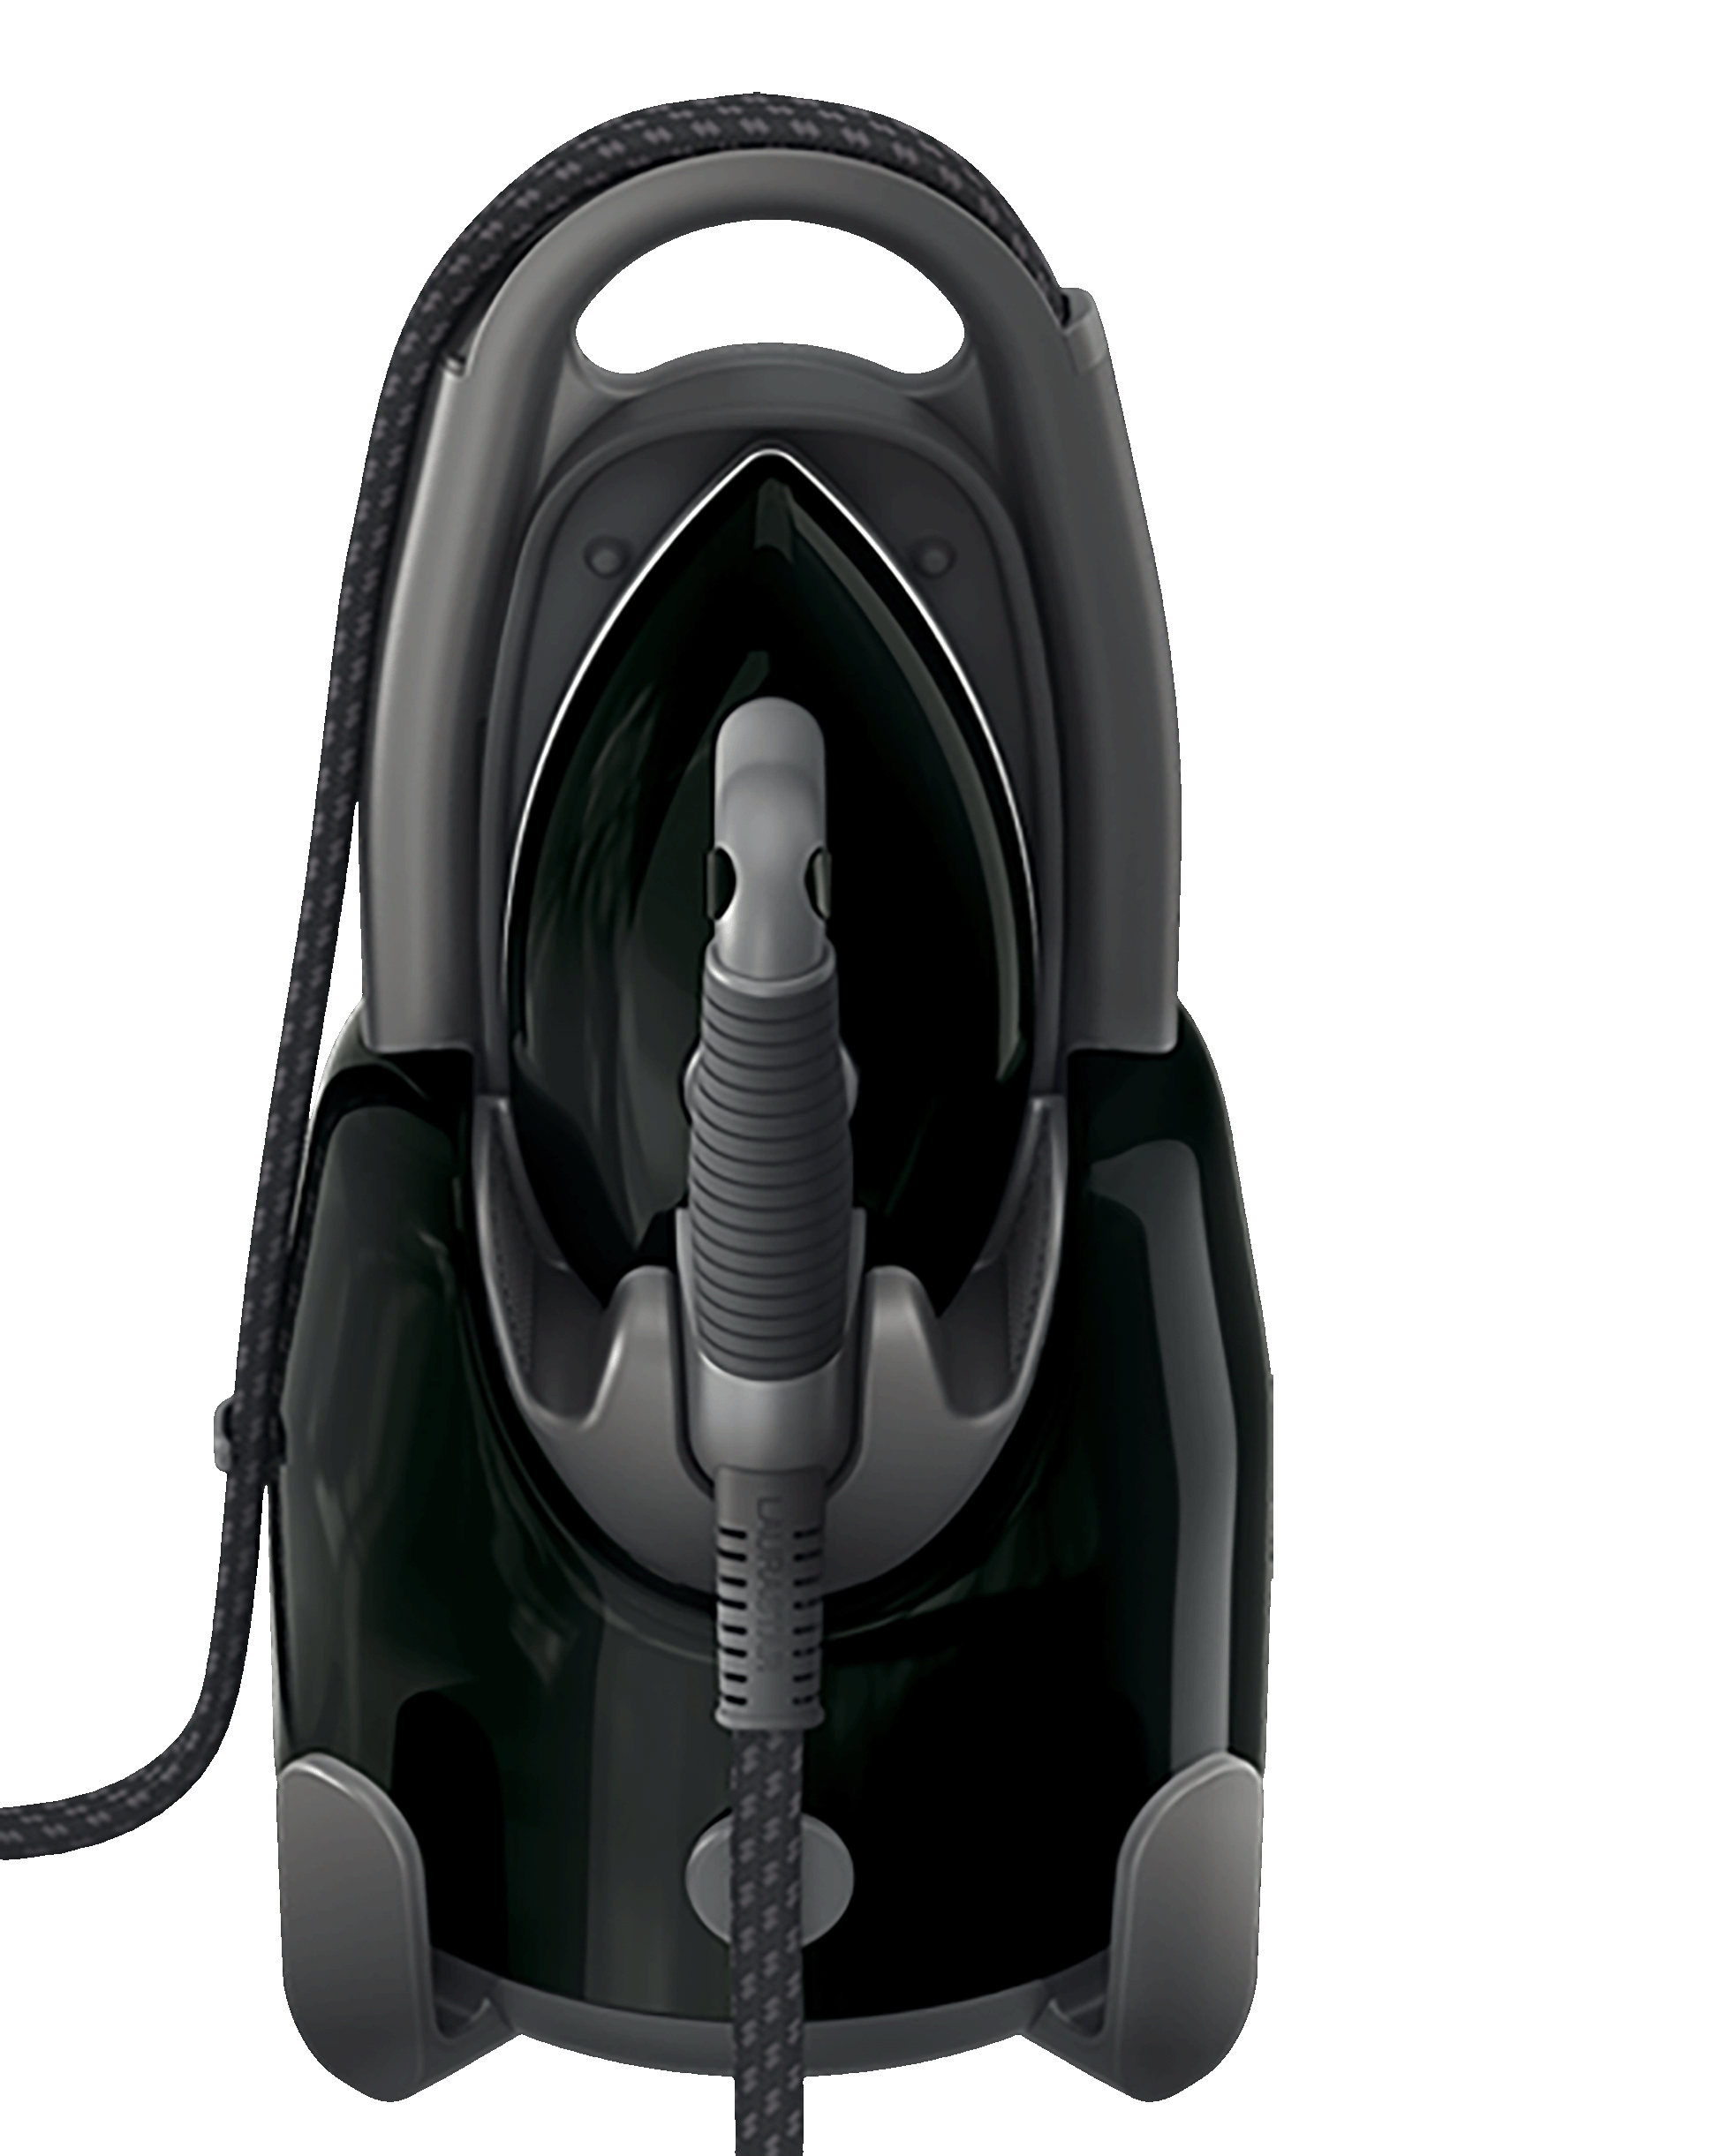 the department The Ultimate Plus in Black (1450-Watt) LAURASTAR Iron Lift at Irons Automatic Shut-off